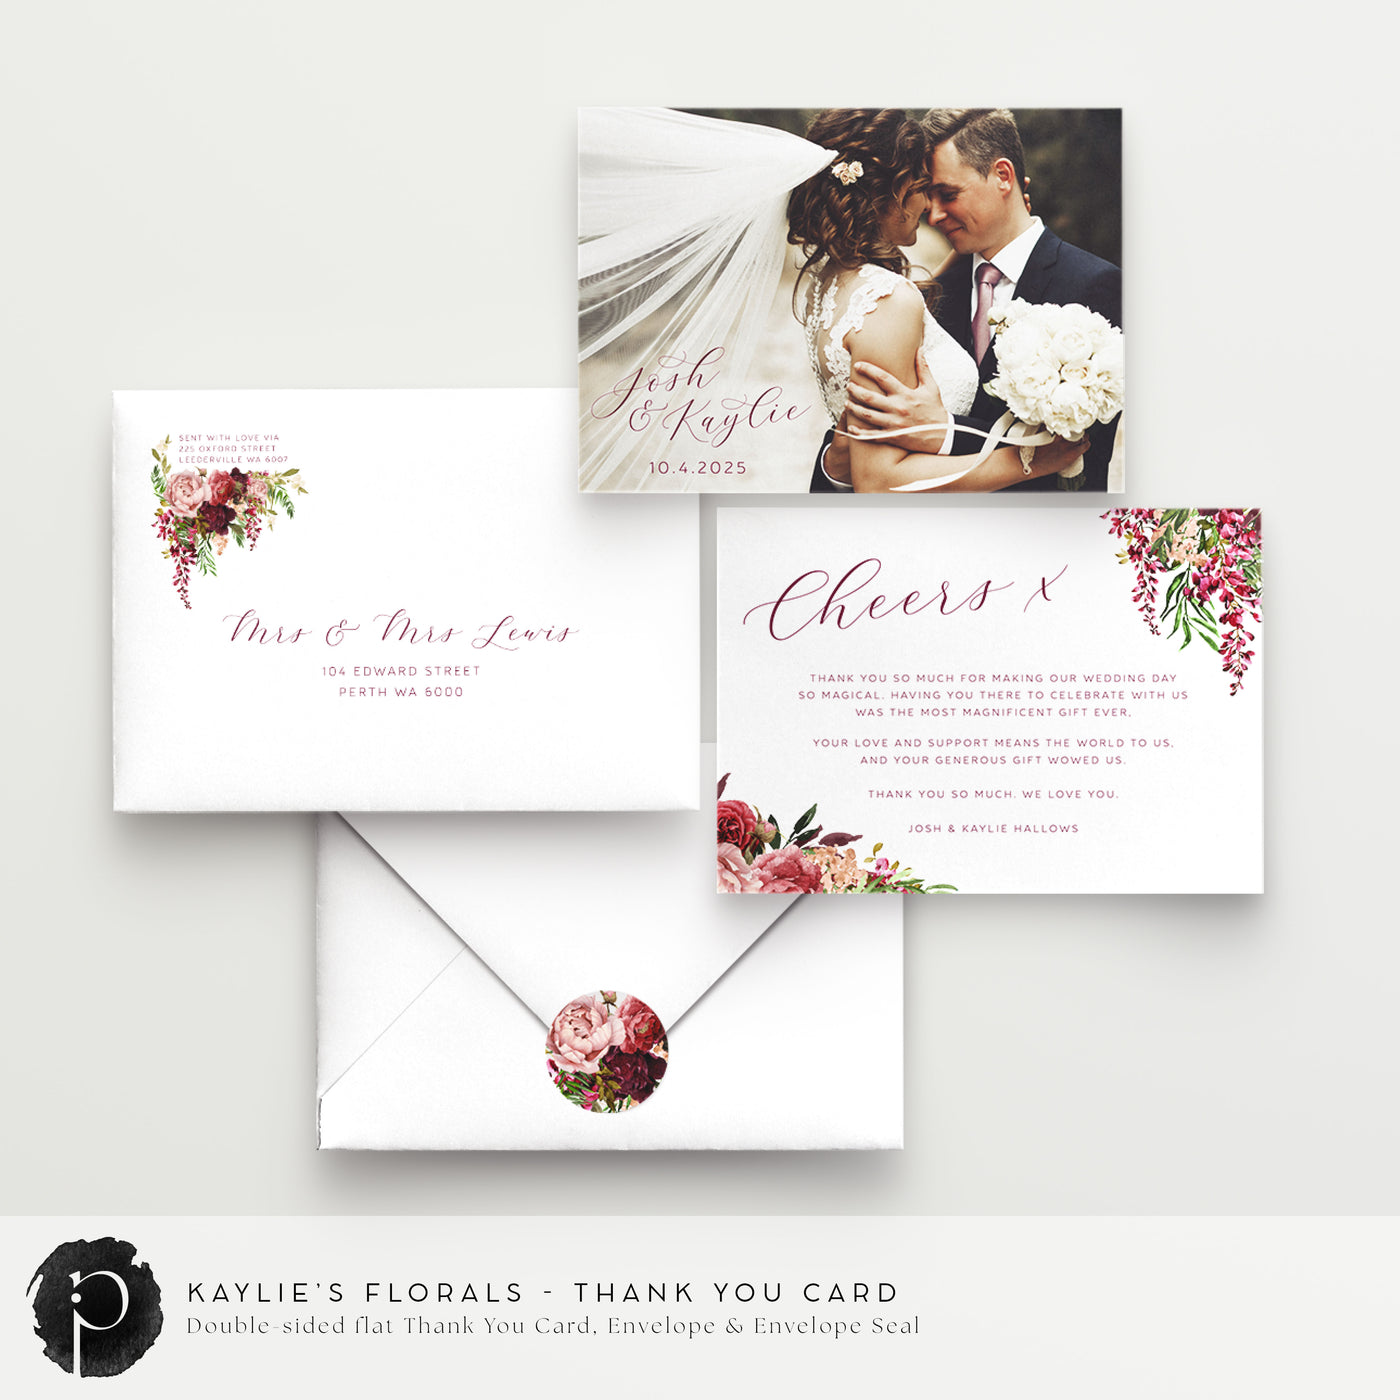 Kaylie's Florals - Wedding Thank You Cards